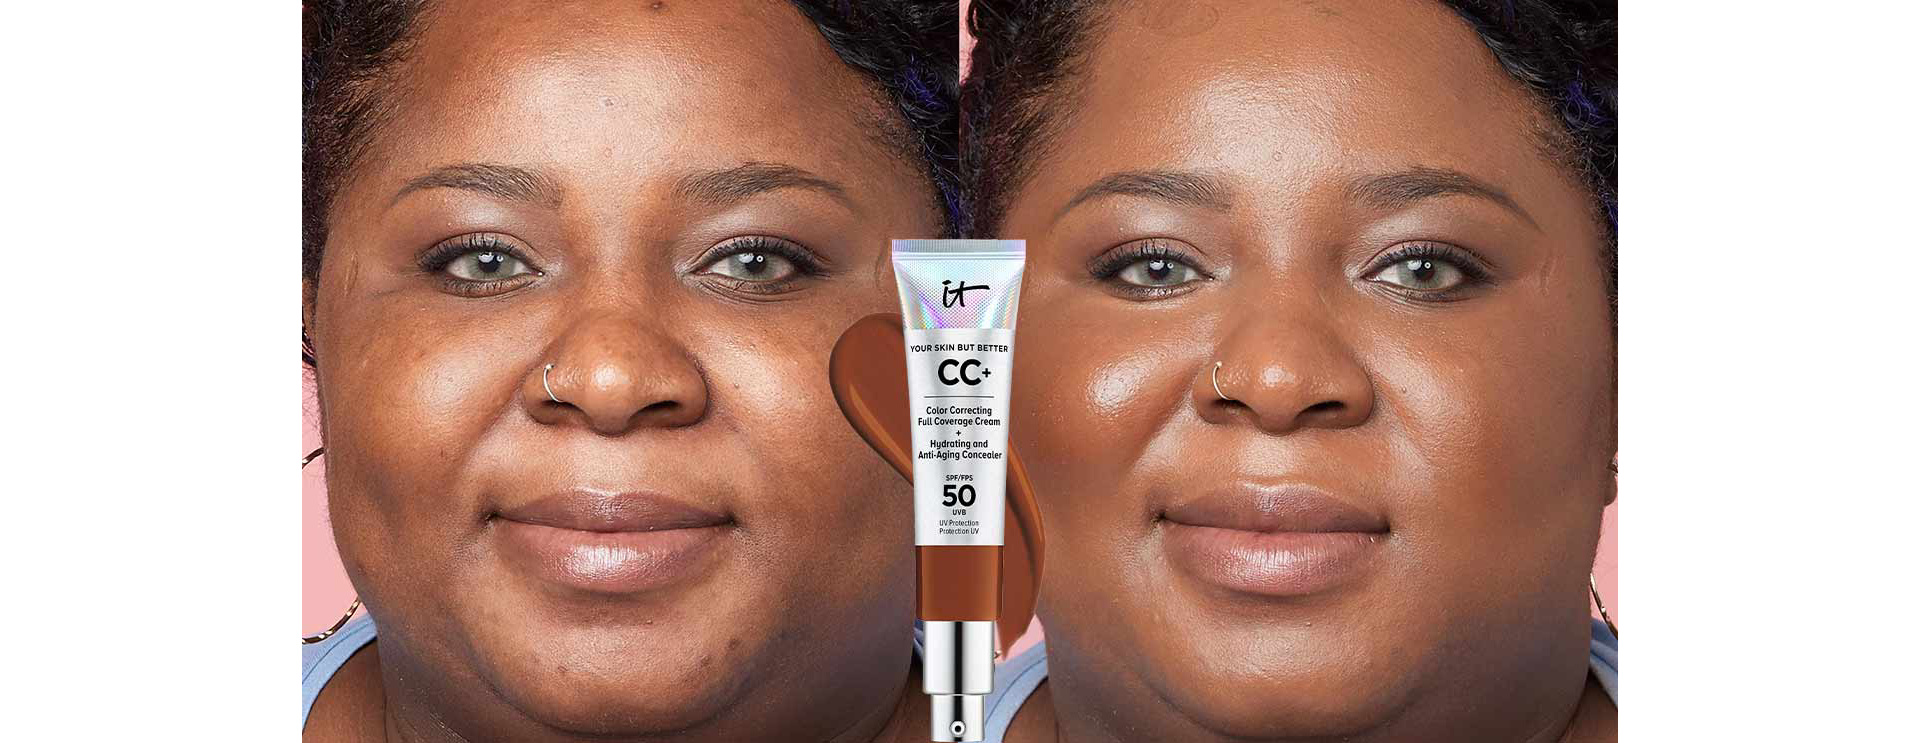 IT Cosmetics Your Skin But Better CC+ Cream - Color India